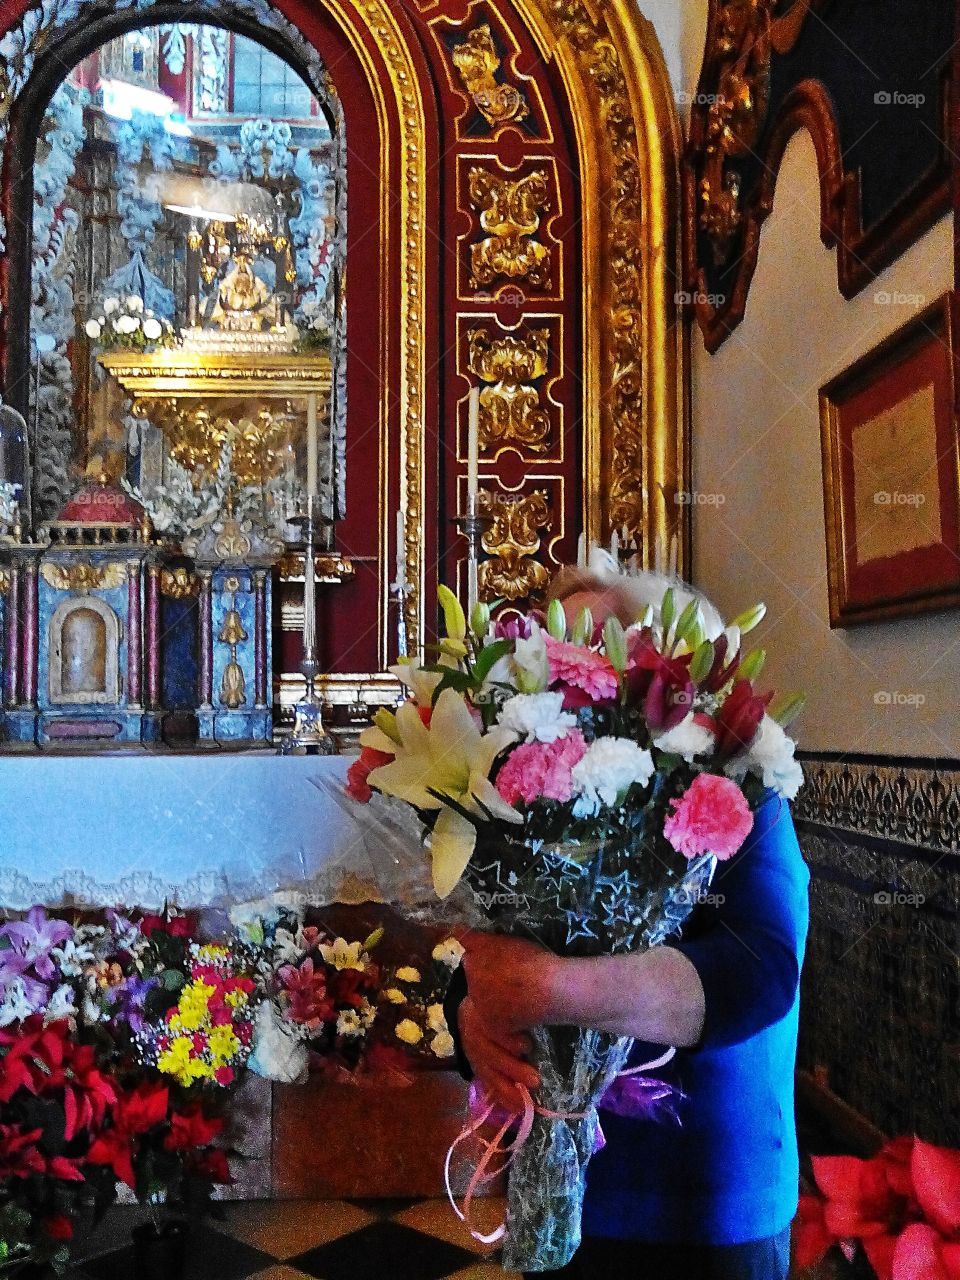 Decorating church with flowers